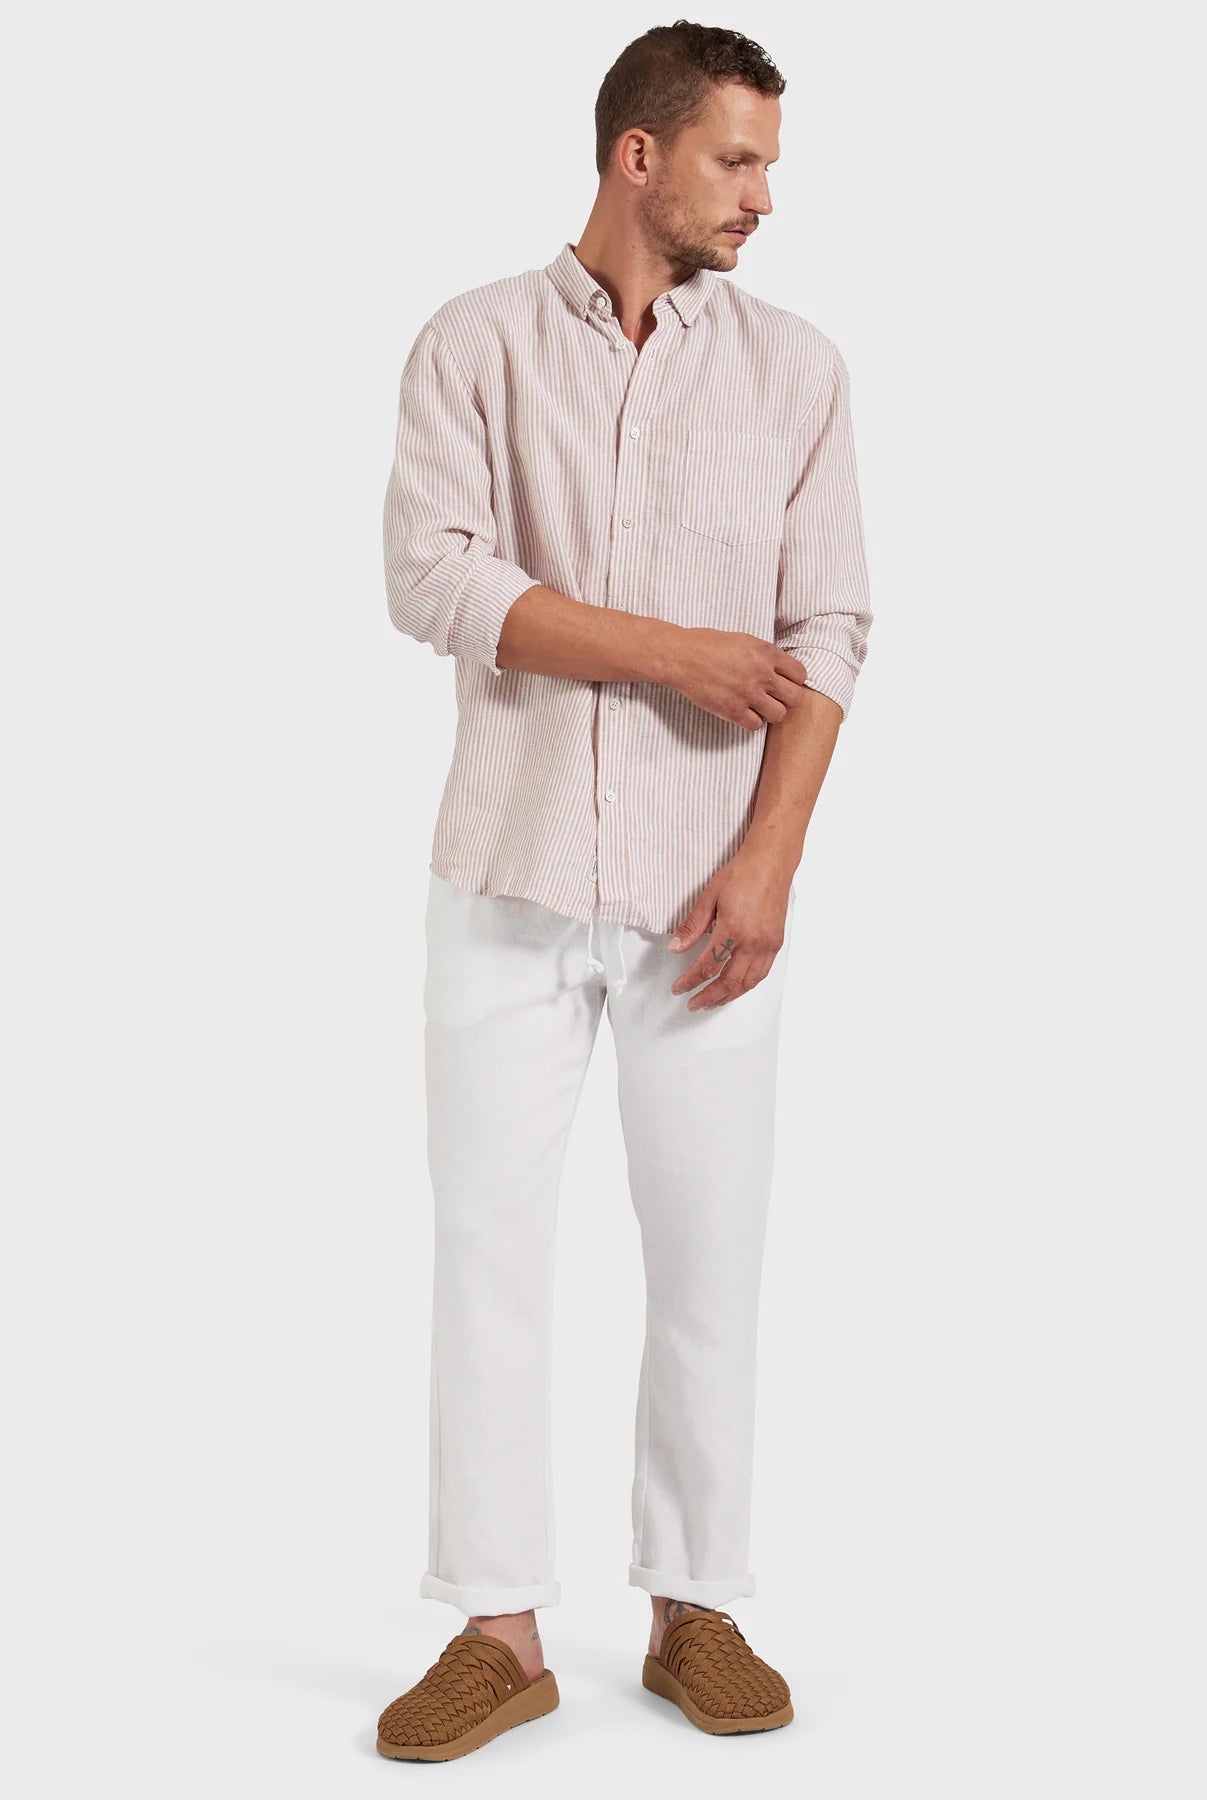 Riviera Linen Pant in White